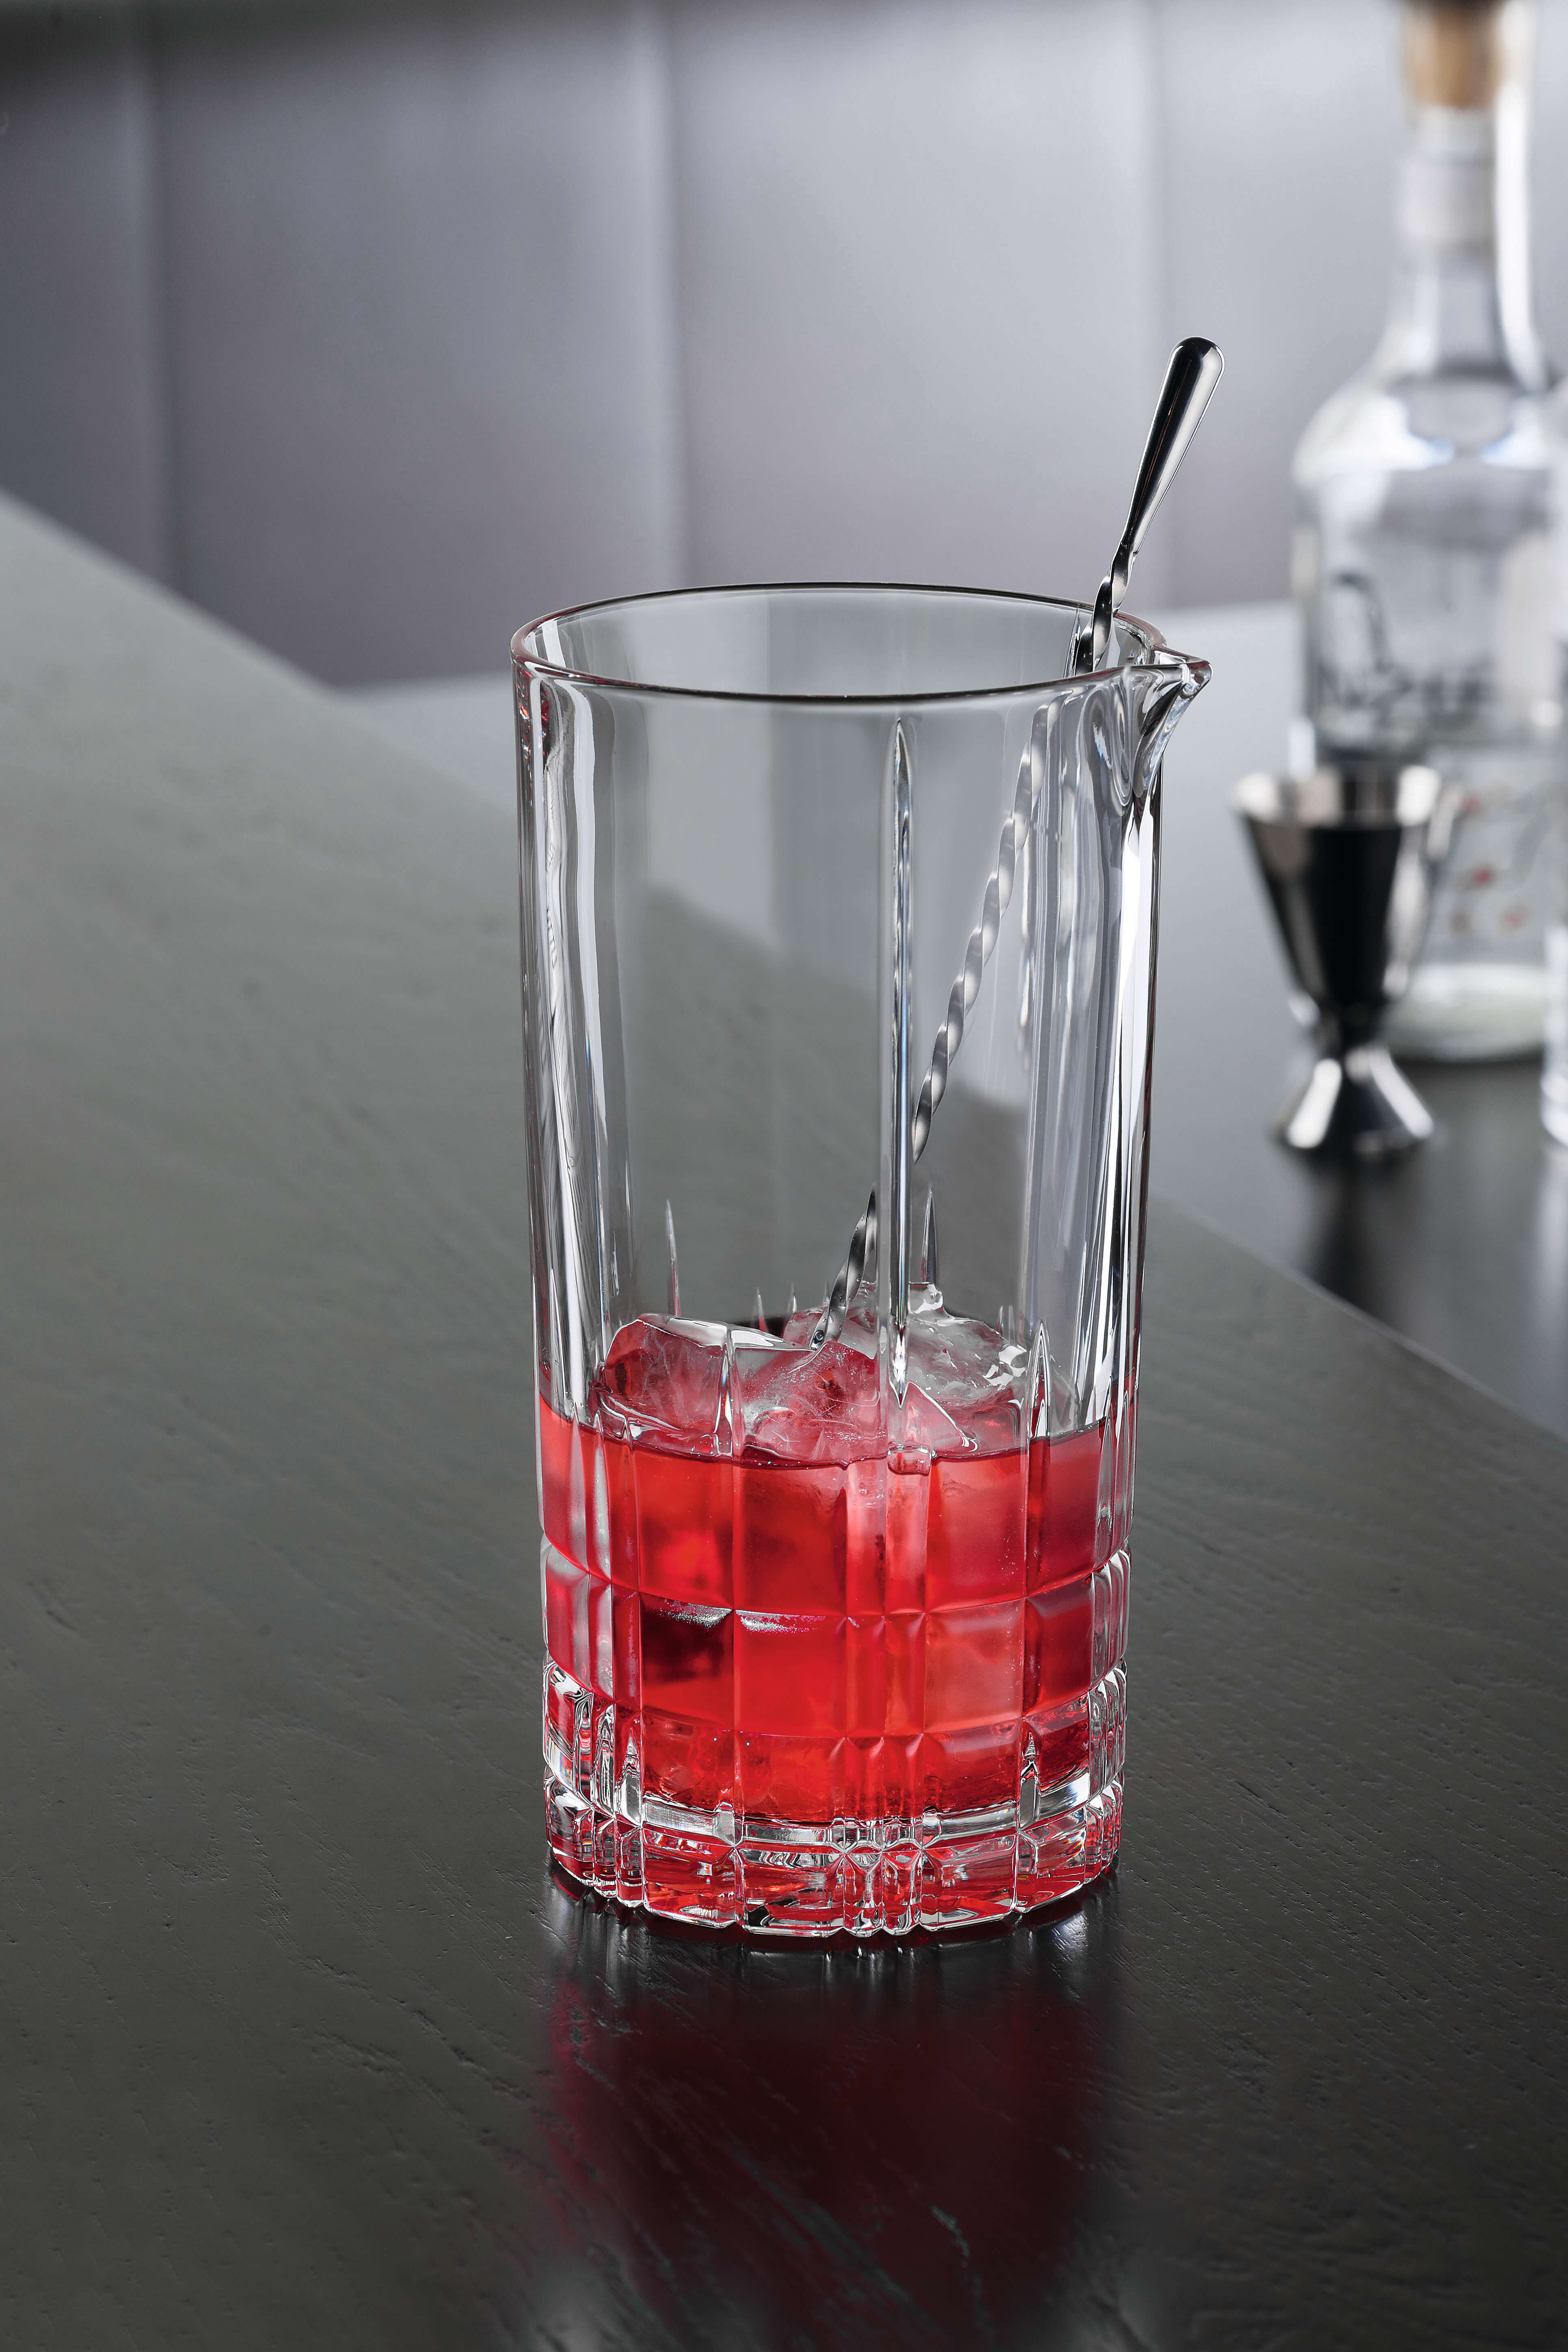 Mixing glass big, Perfect Serve Collection Spiegelau - 750ml